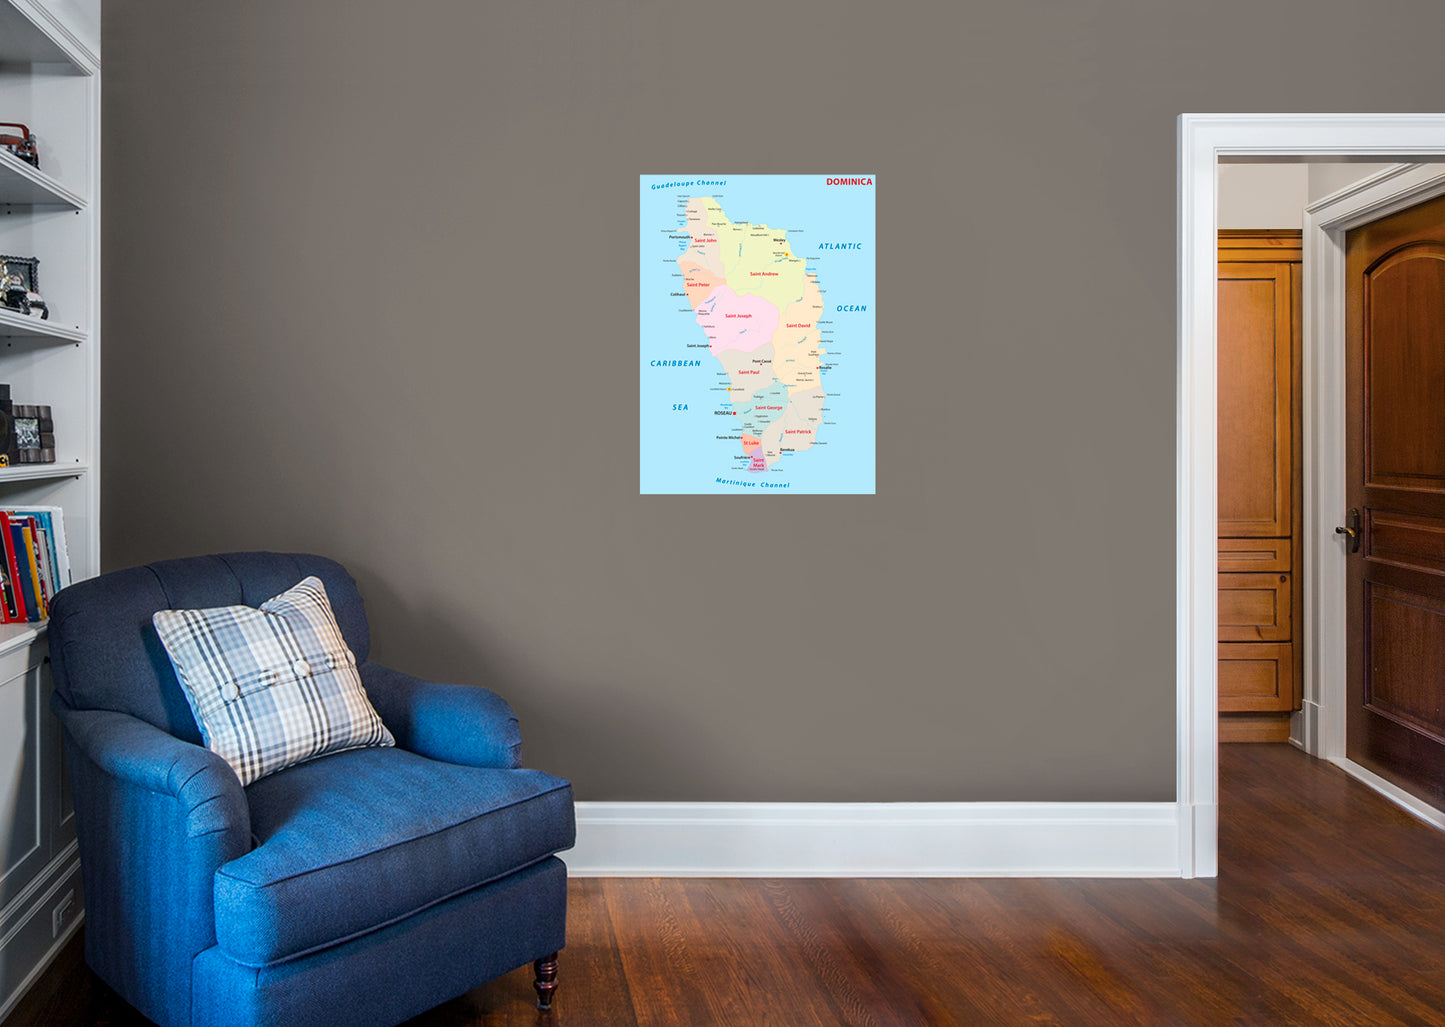 Maps of North America: Dominica Mural        -   Removable Wall   Adhesive Decal